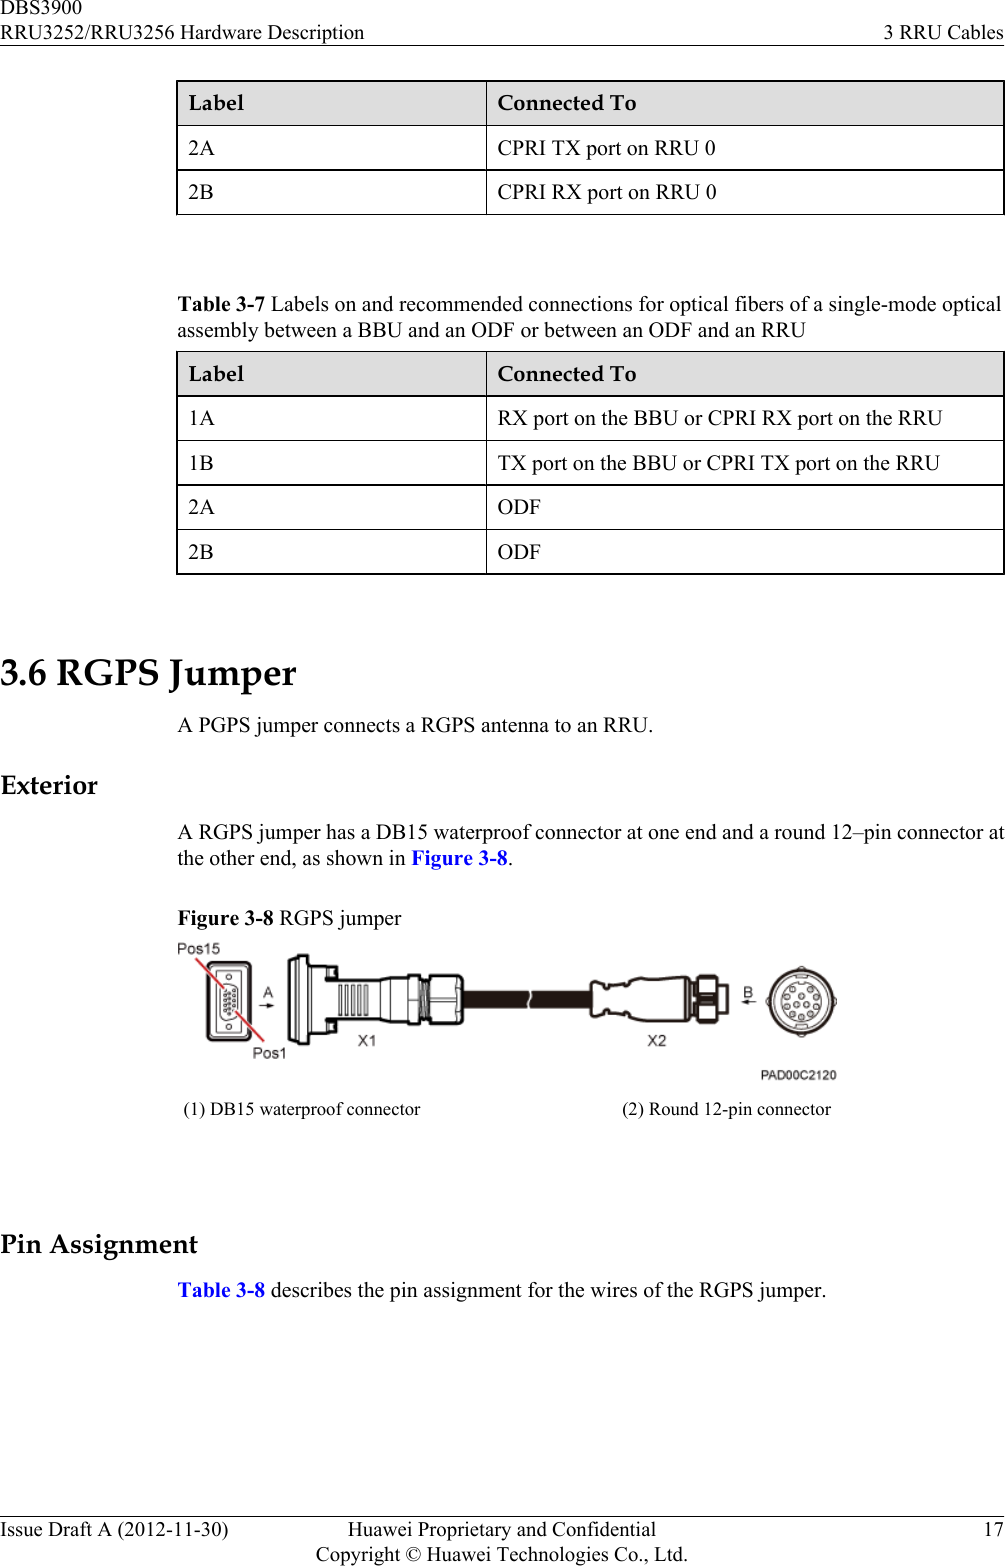 Label Connected To2A CPRI TX port on RRU 02B CPRI RX port on RRU 0 Table 3-7 Labels on and recommended connections for optical fibers of a single-mode opticalassembly between a BBU and an ODF or between an ODF and an RRULabel Connected To1A RX port on the BBU or CPRI RX port on the RRU1B TX port on the BBU or CPRI TX port on the RRU2A ODF2B ODF 3.6 RGPS JumperA PGPS jumper connects a RGPS antenna to an RRU.ExteriorA RGPS jumper has a DB15 waterproof connector at one end and a round 12–pin connector atthe other end, as shown in Figure 3-8.Figure 3-8 RGPS jumper(1) DB15 waterproof connector (2) Round 12-pin connector Pin AssignmentTable 3-8 describes the pin assignment for the wires of the RGPS jumper.DBS3900RRU3252/RRU3256 Hardware Description 3 RRU CablesIssue Draft A (2012-11-30) Huawei Proprietary and ConfidentialCopyright © Huawei Technologies Co., Ltd.17